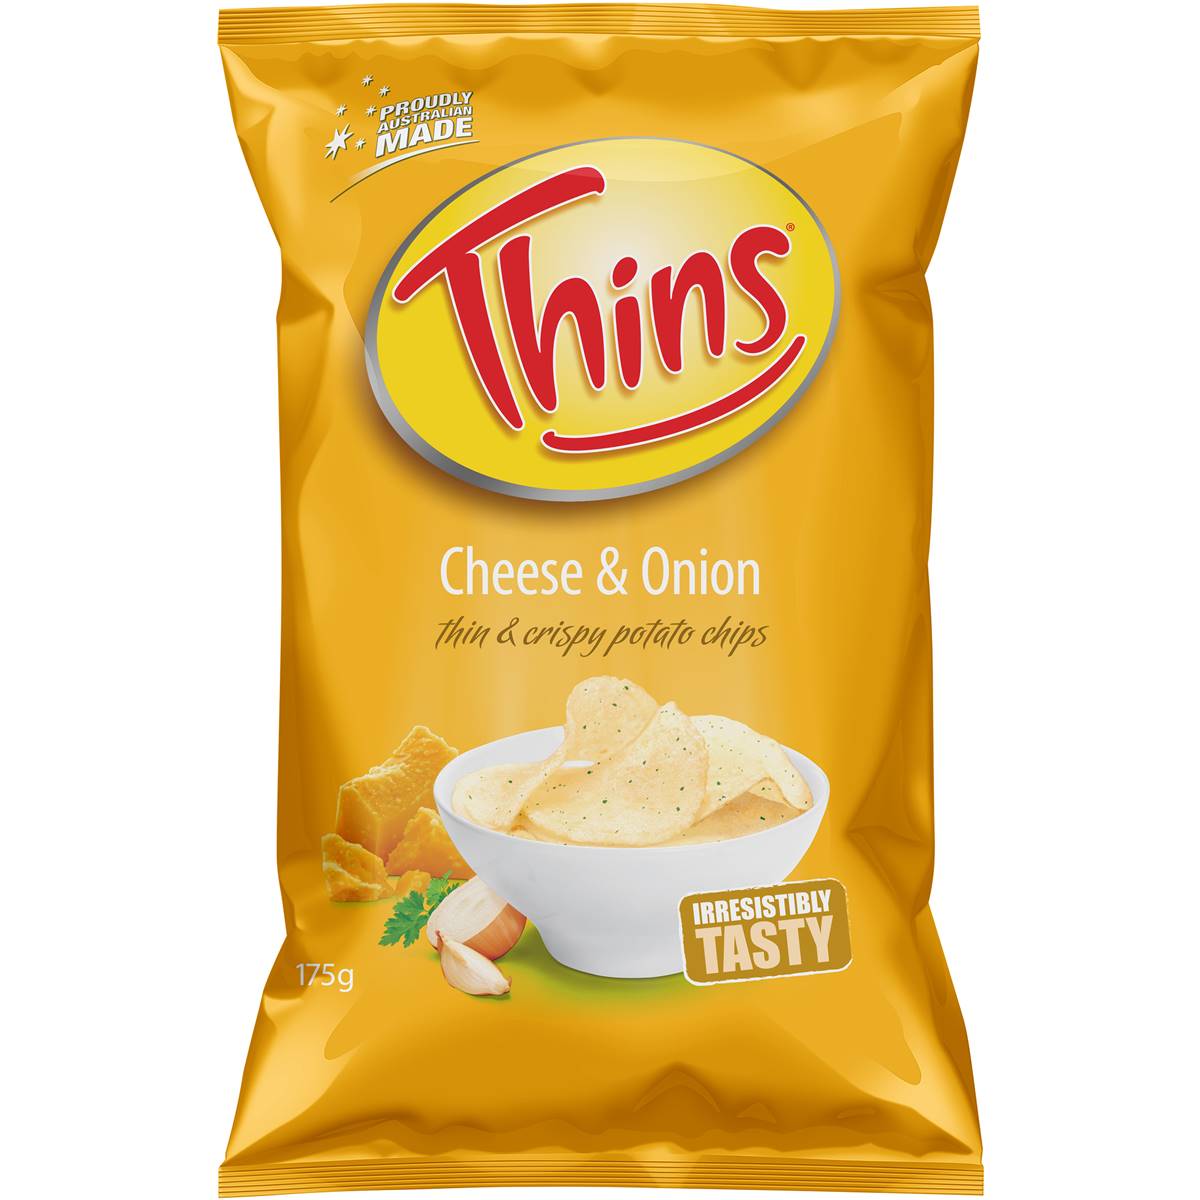 Calories in Thins Cheese & Onion Chips